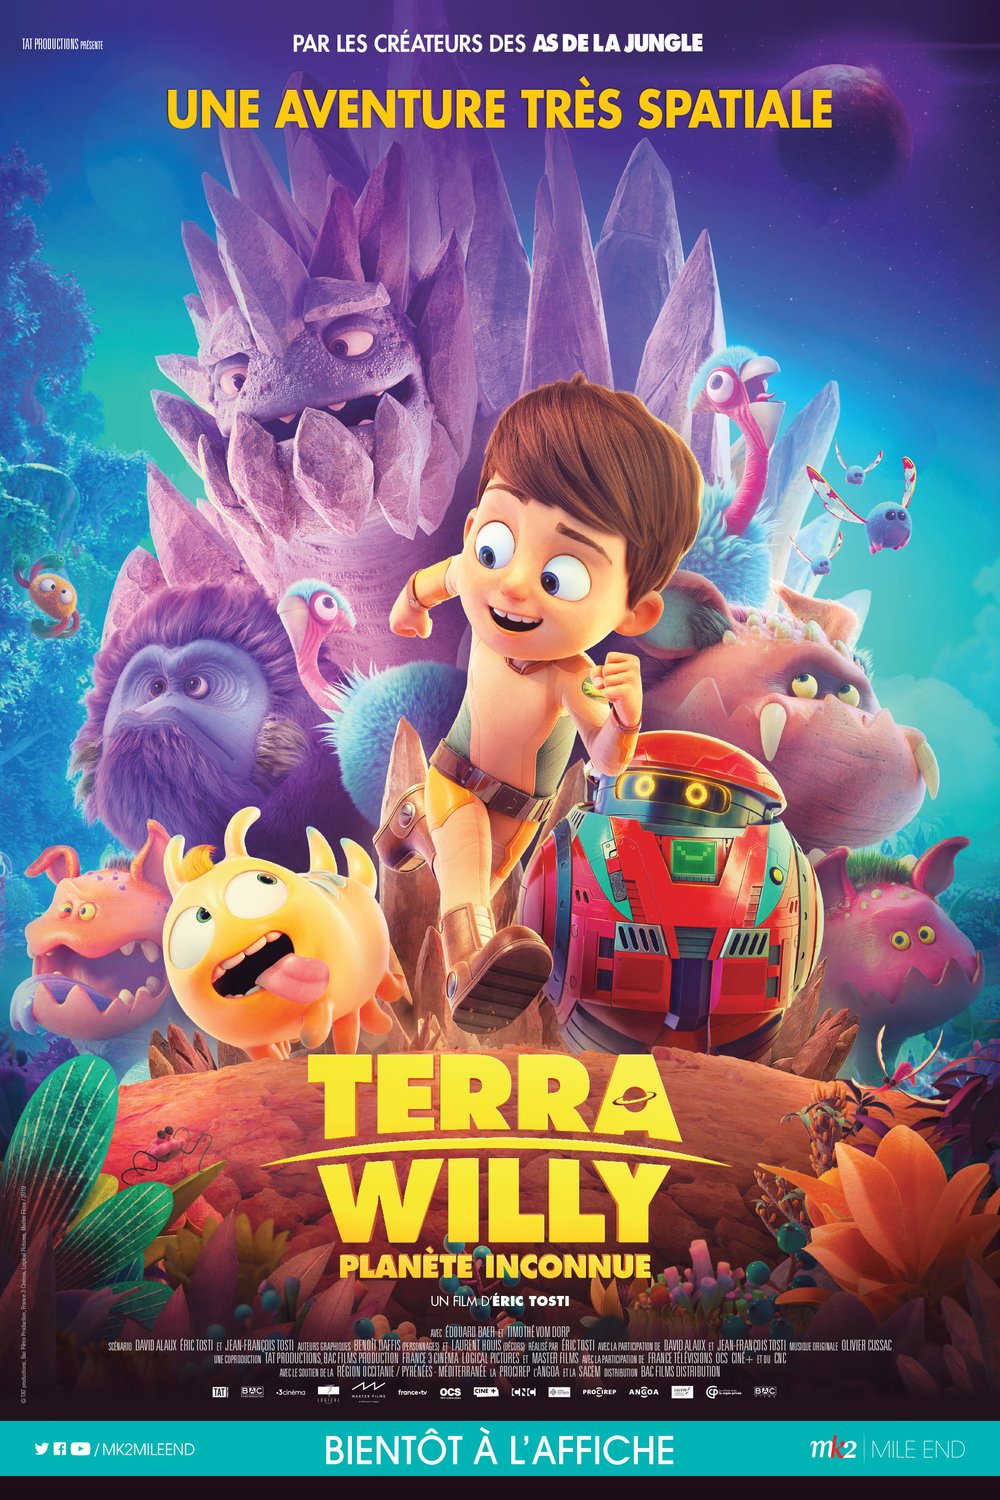 Poster of the movie Terra Willy: Planète inconnue